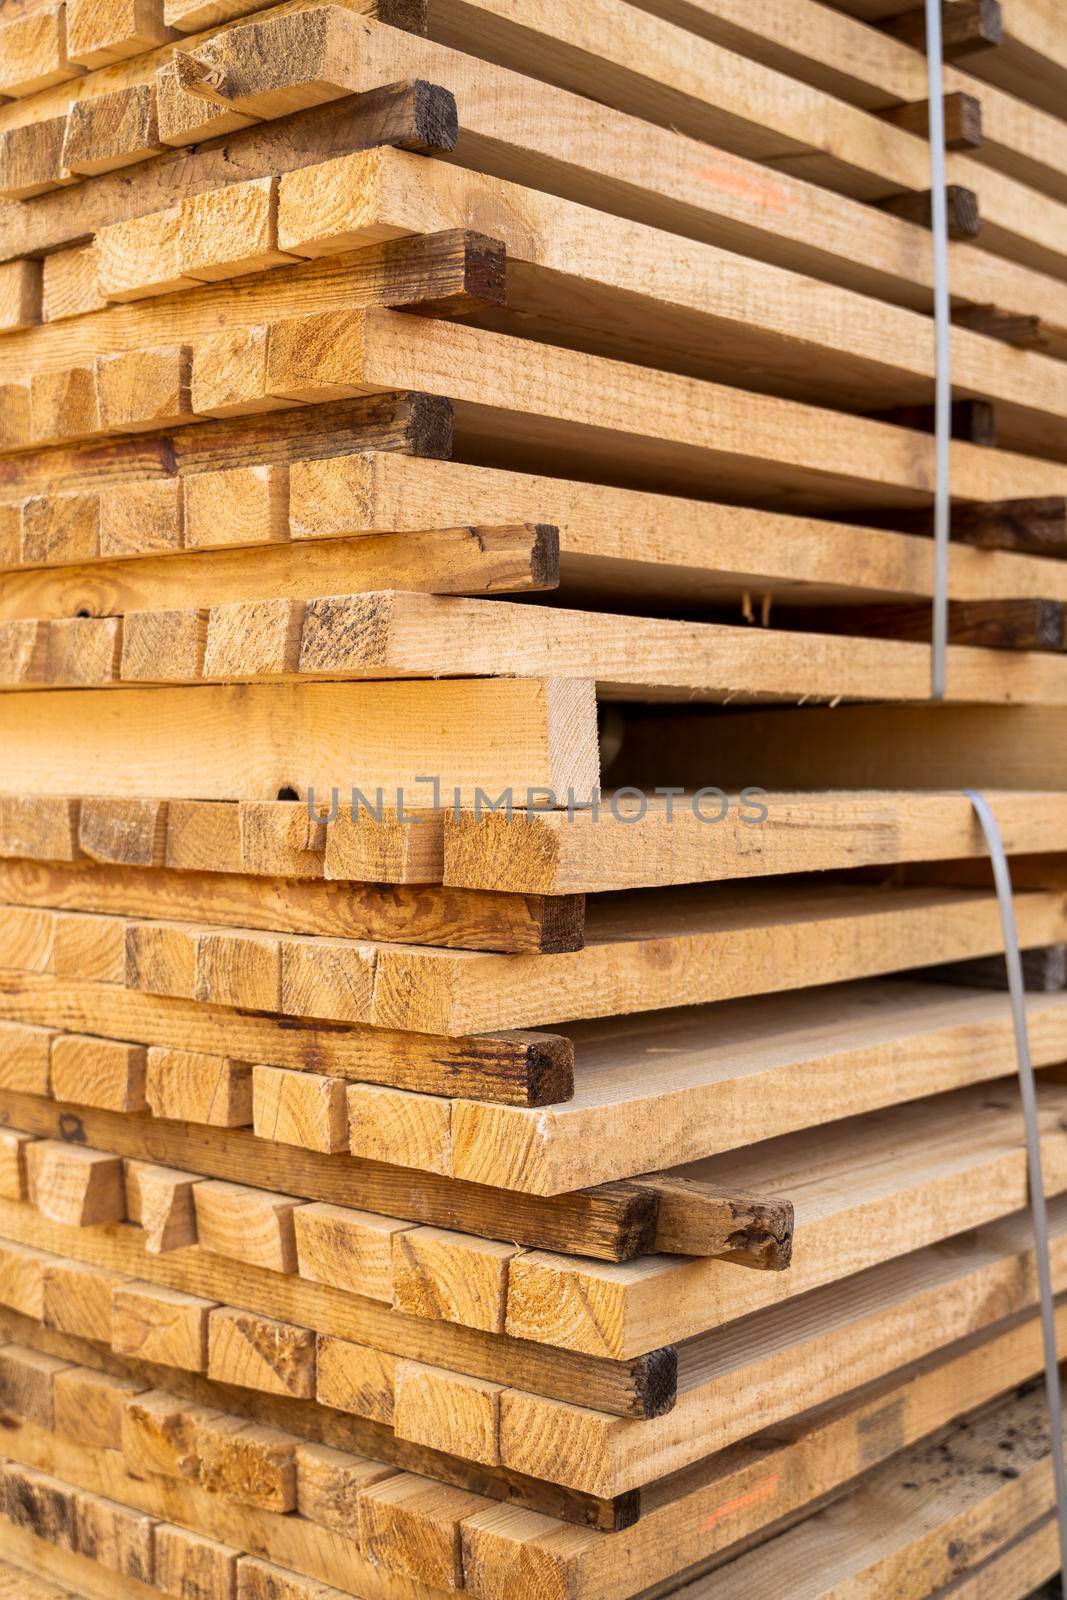 Storage of piles of wooden boards on the sawmill. Boards are stacked in a carpentry shop. Sawing drying and marketing of wood. Pine lumber for furniture production, construction. Lumber Industry. by vovsht